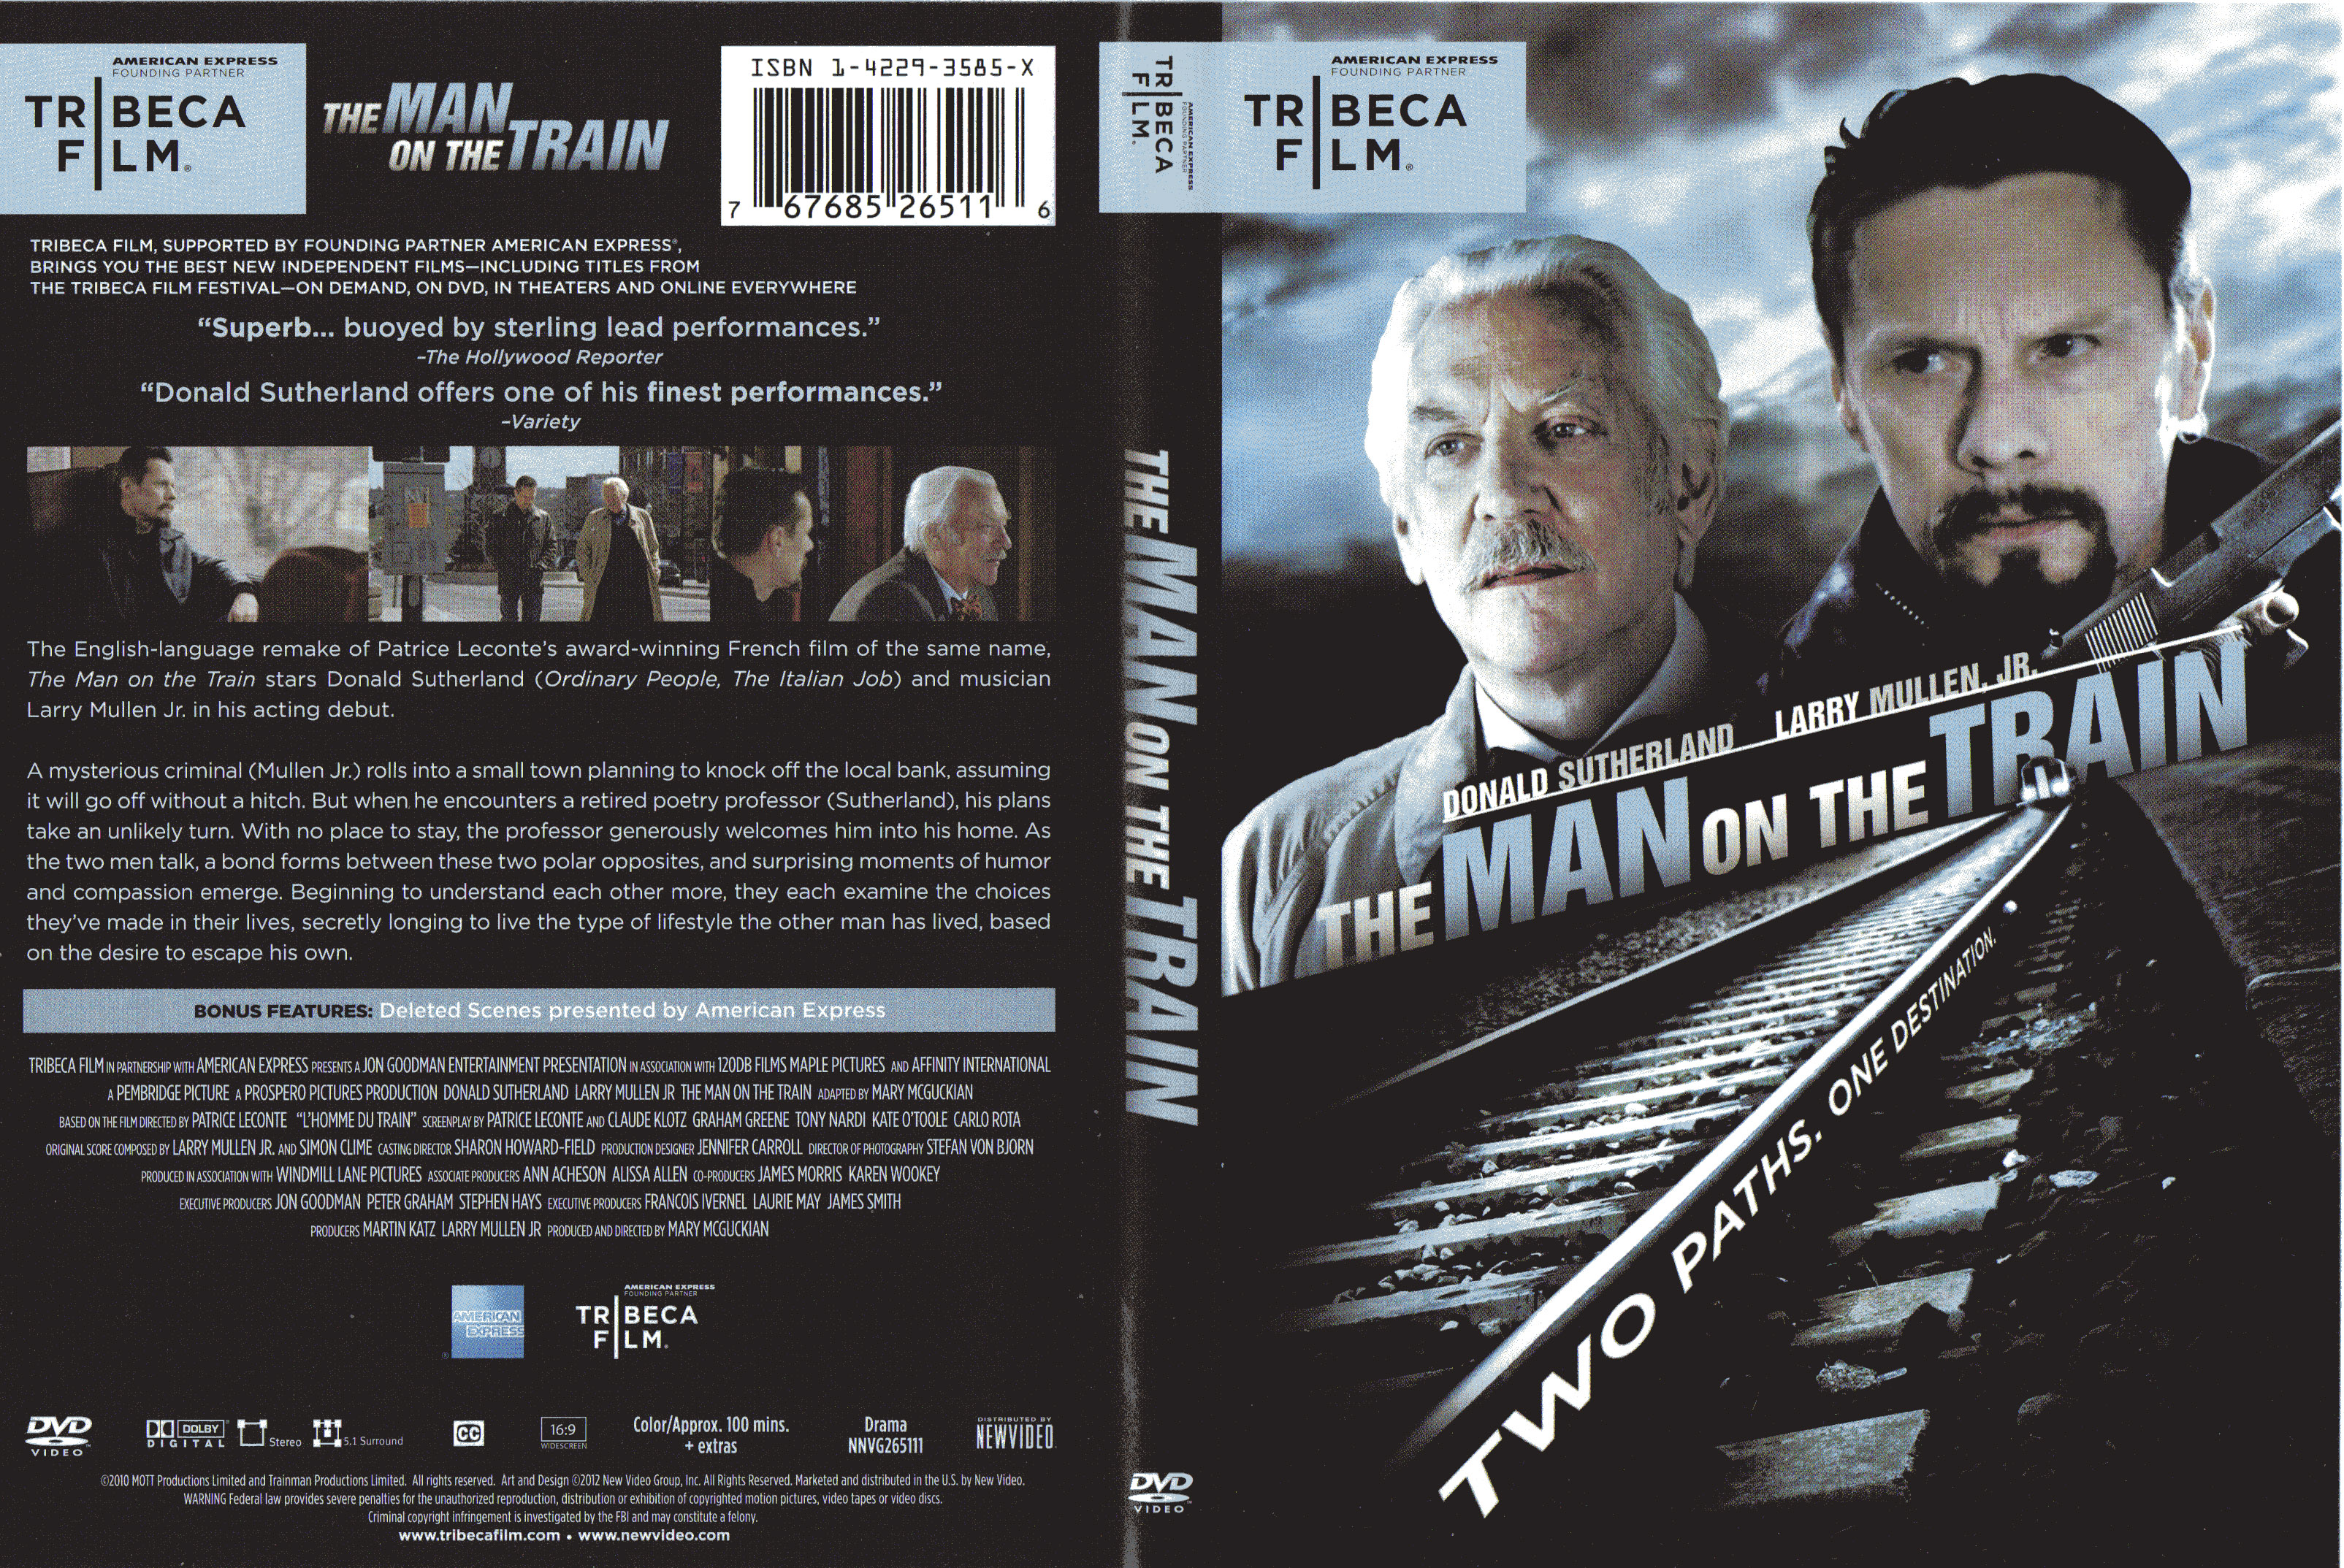 Jaquette DVD The Man On The Train Zone 1